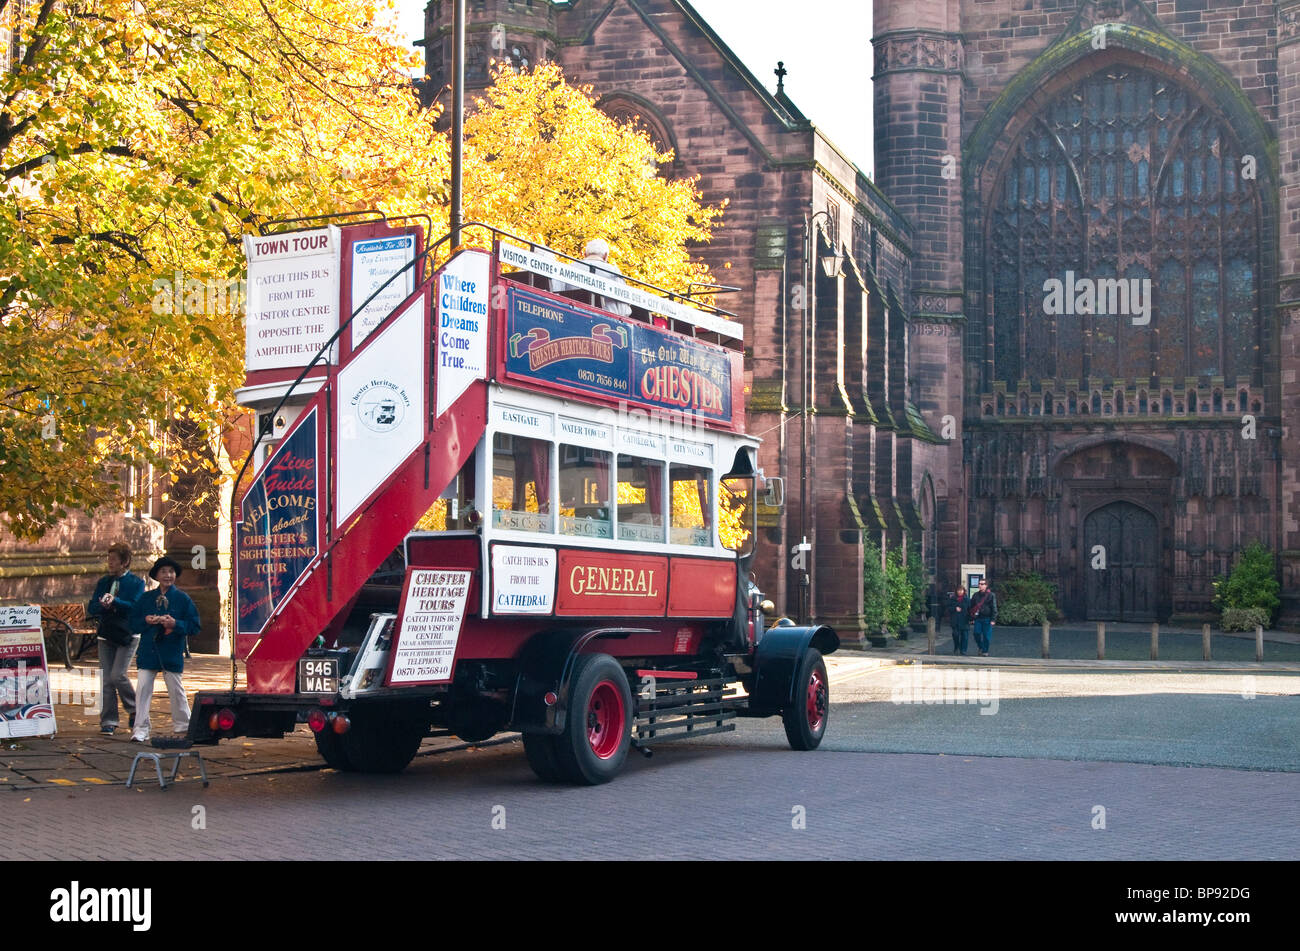 Vintager Motor Bus For taking tourists and visitors around Chester with a peep of Chester Cathedral in the background. Stock Photo